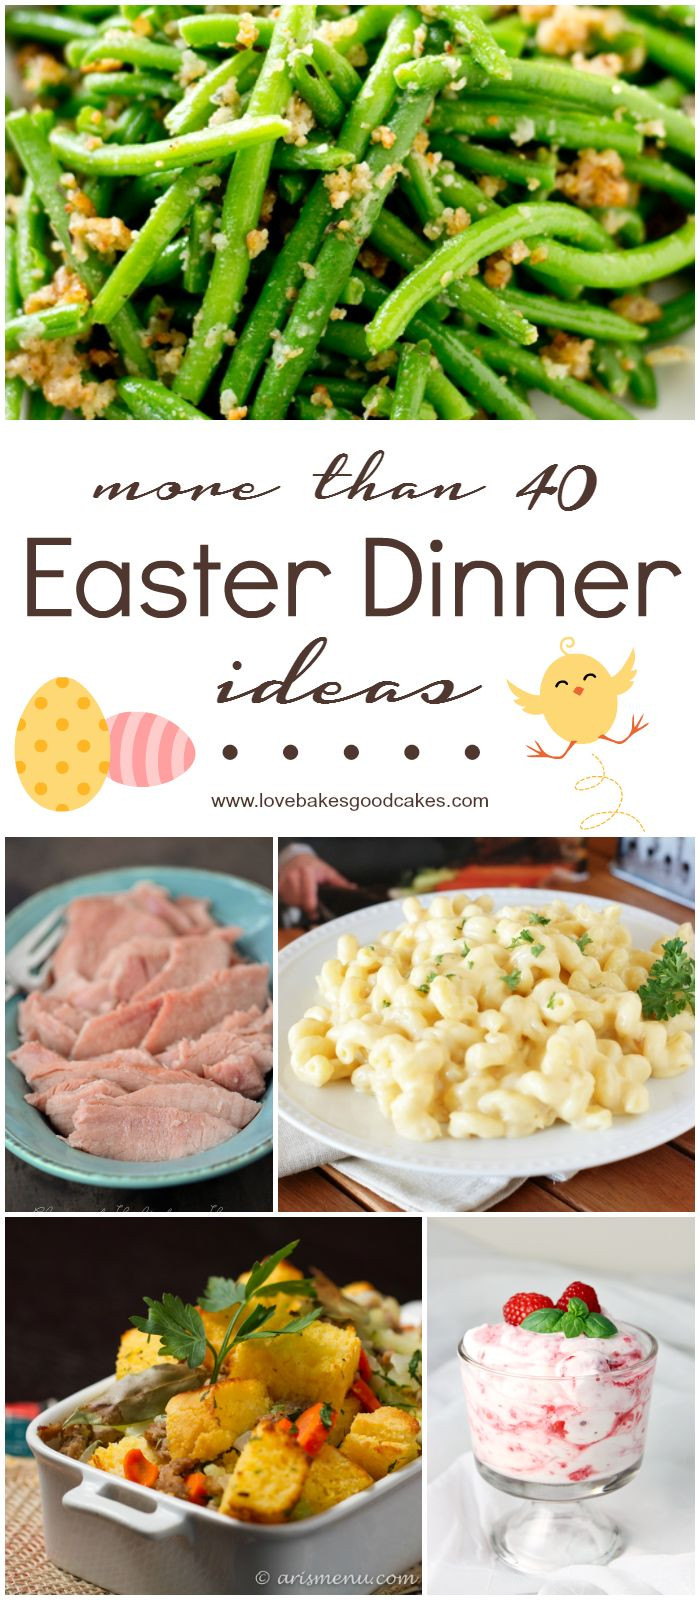 Healthy Easter Dinner Ideas
 25 best ideas about Easter on Pinterest